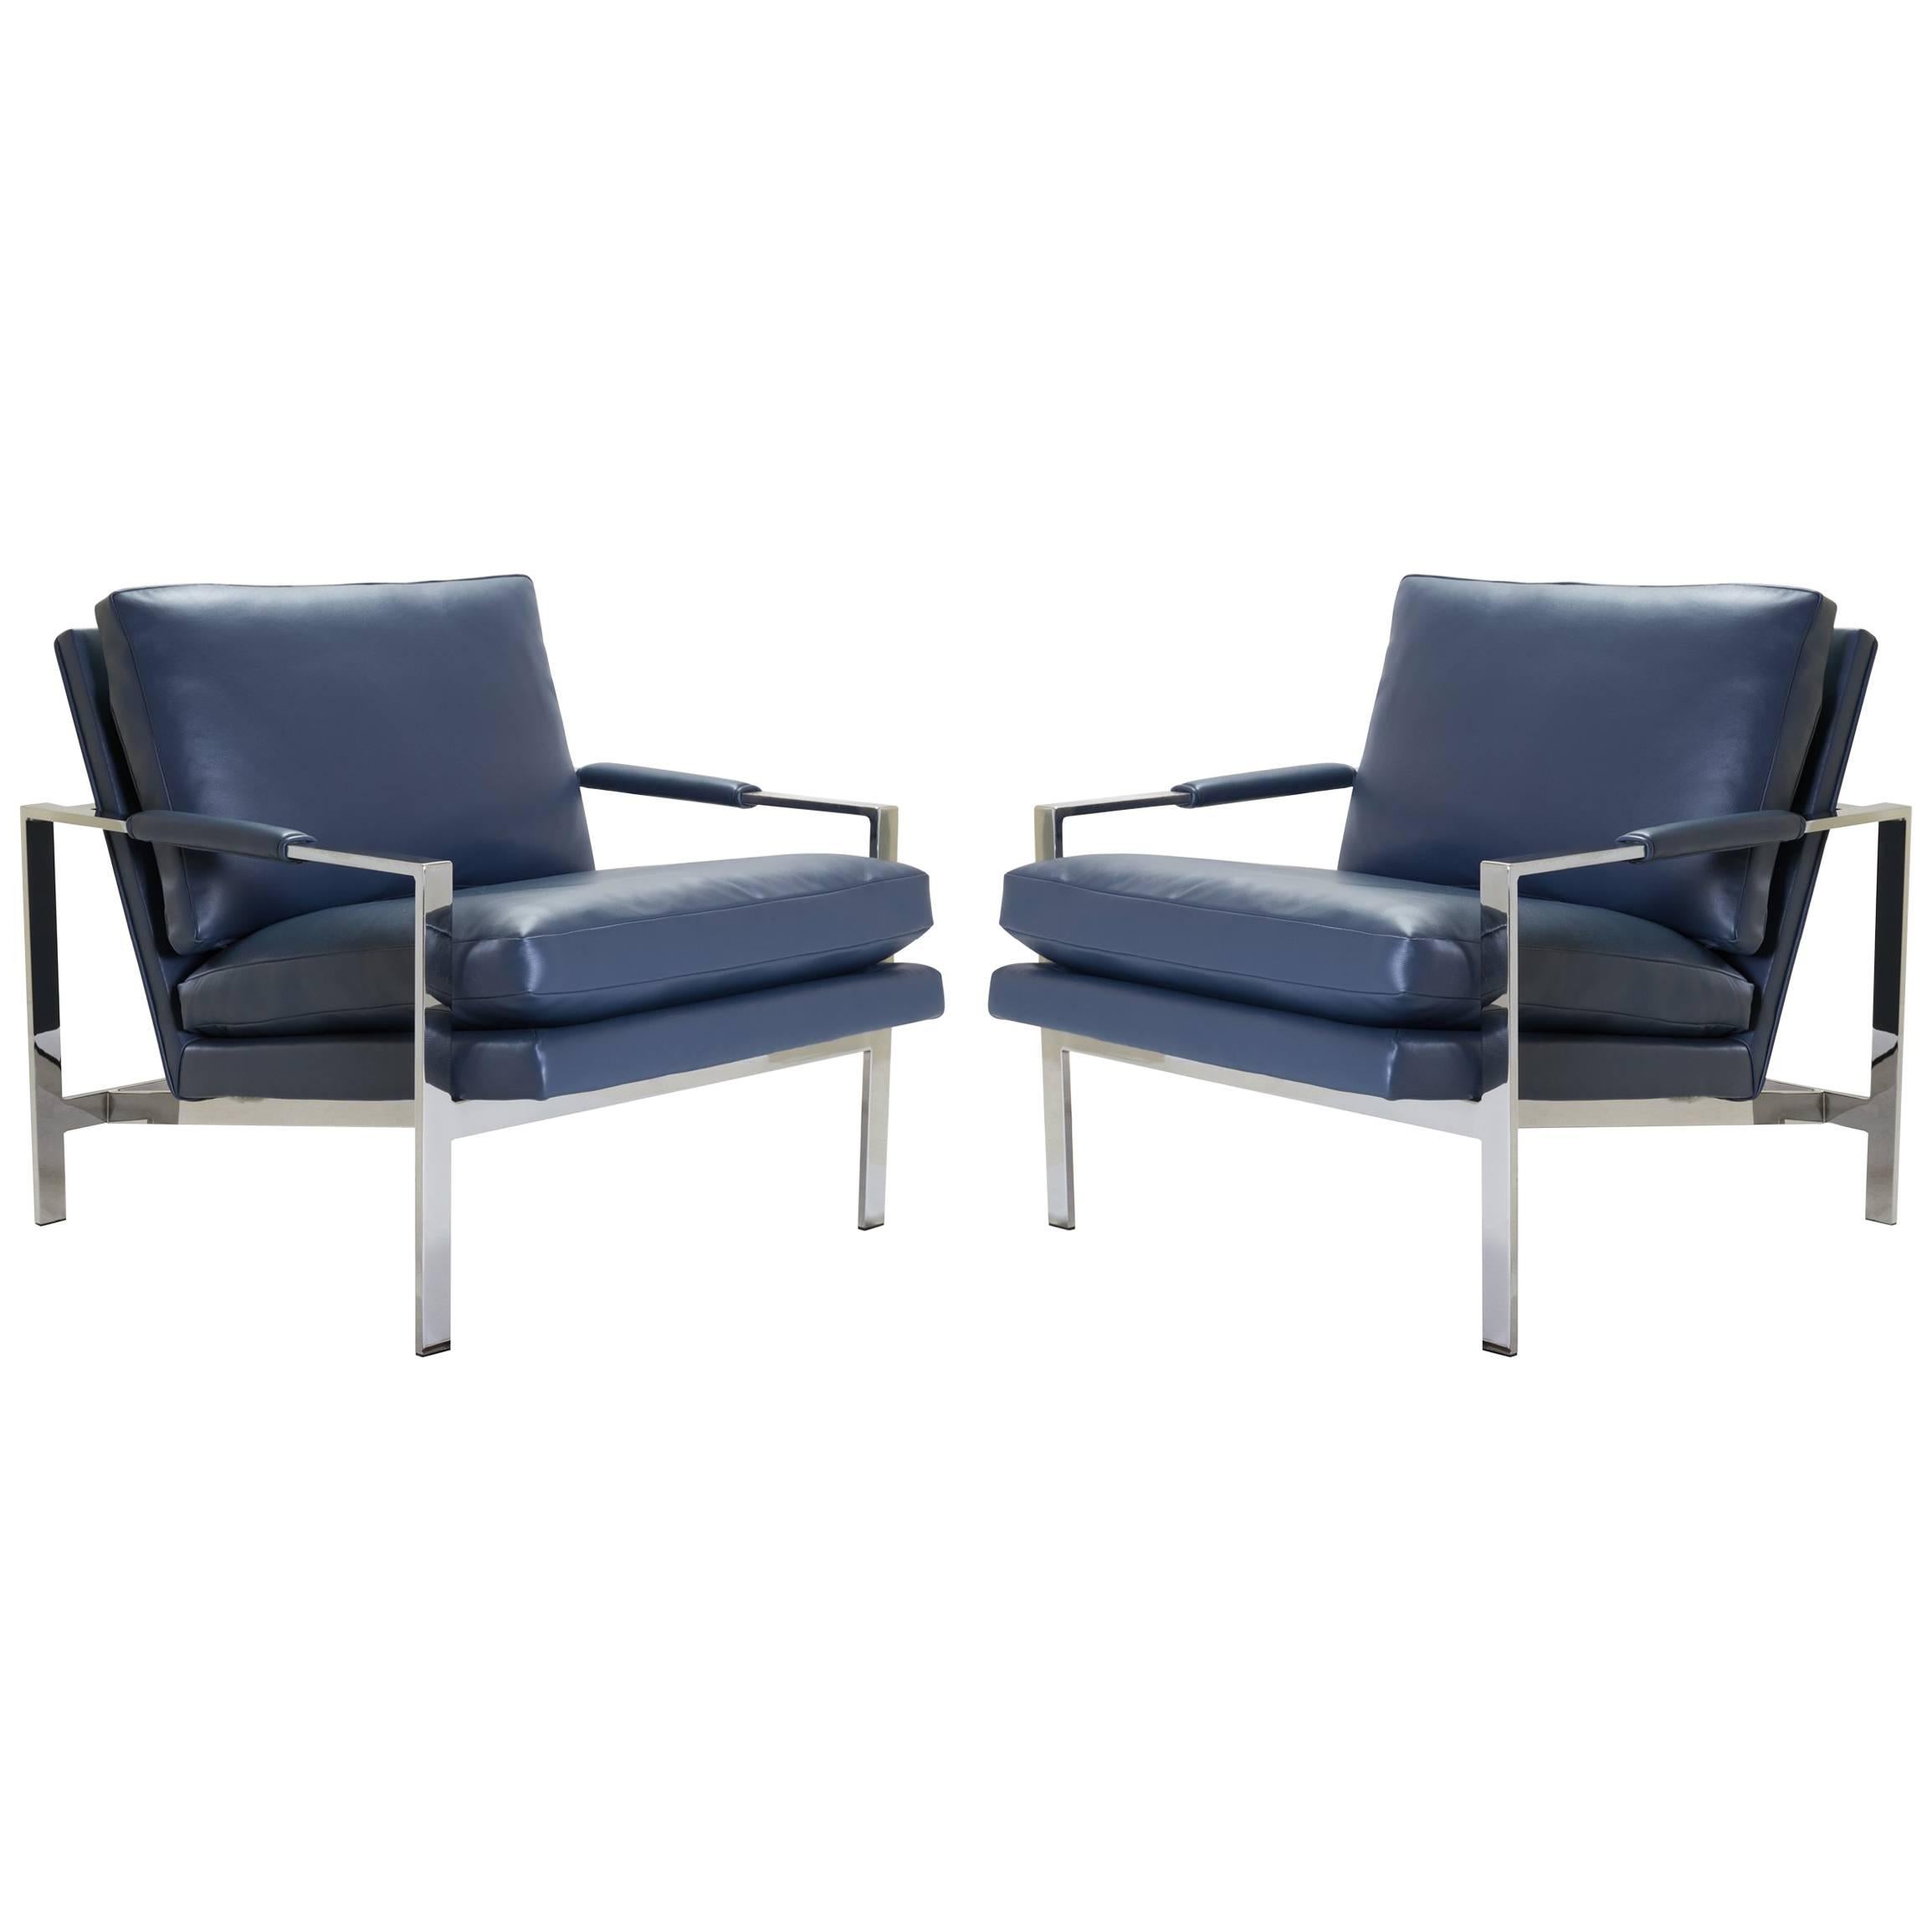 Flat-Bar Club Chairs in Navy Leather by Milo Baughman for Thayer Coggin